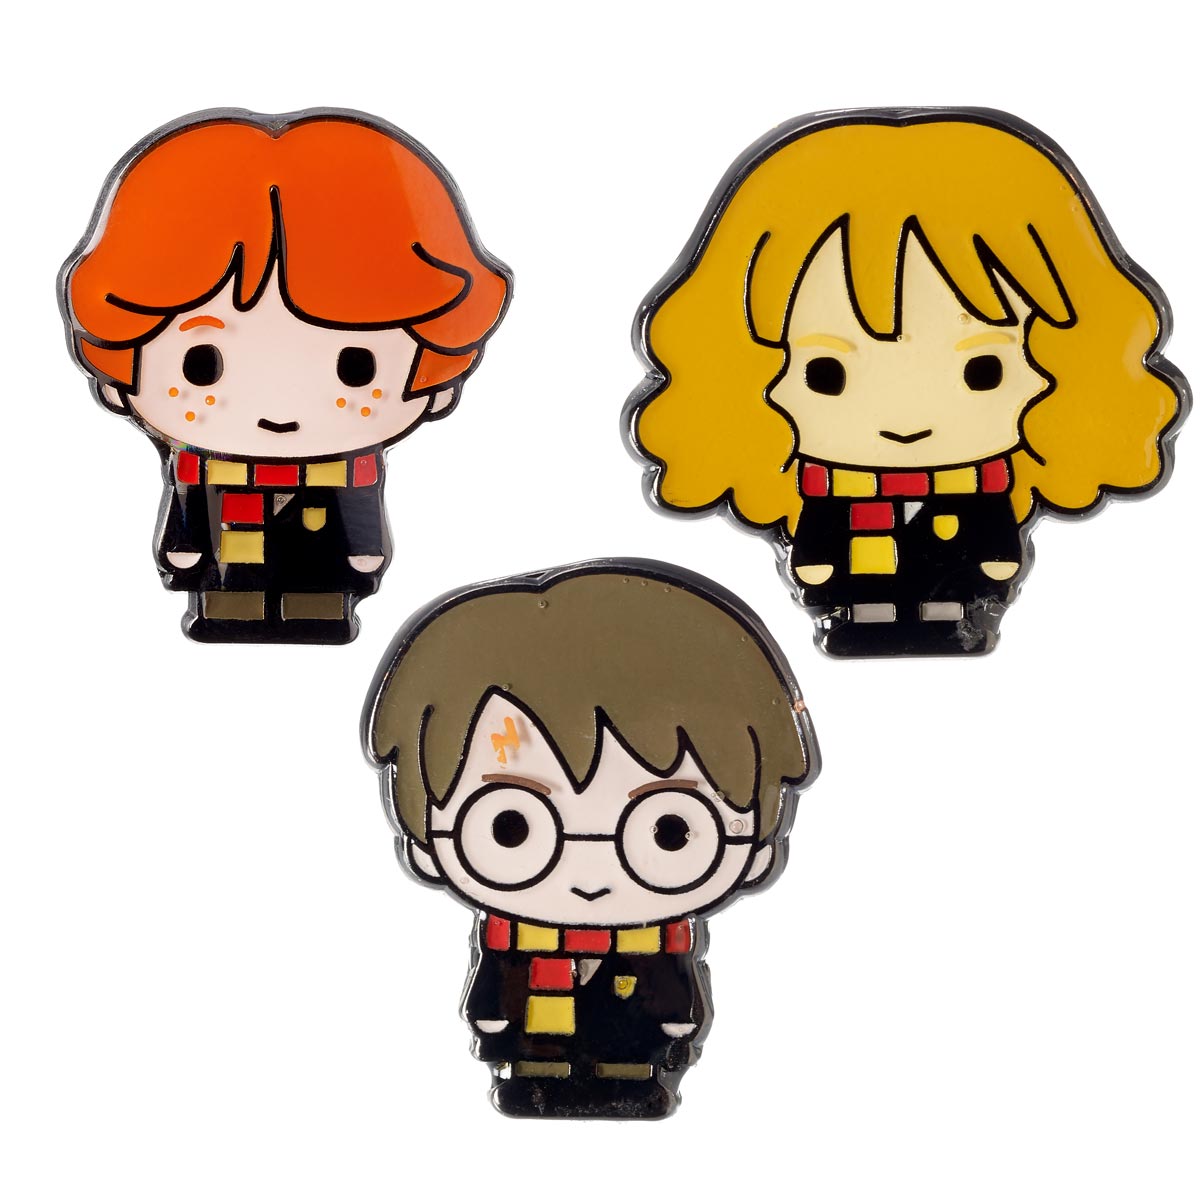 Cute Drawings Of Harry Potter Characters Janeforyou 7301